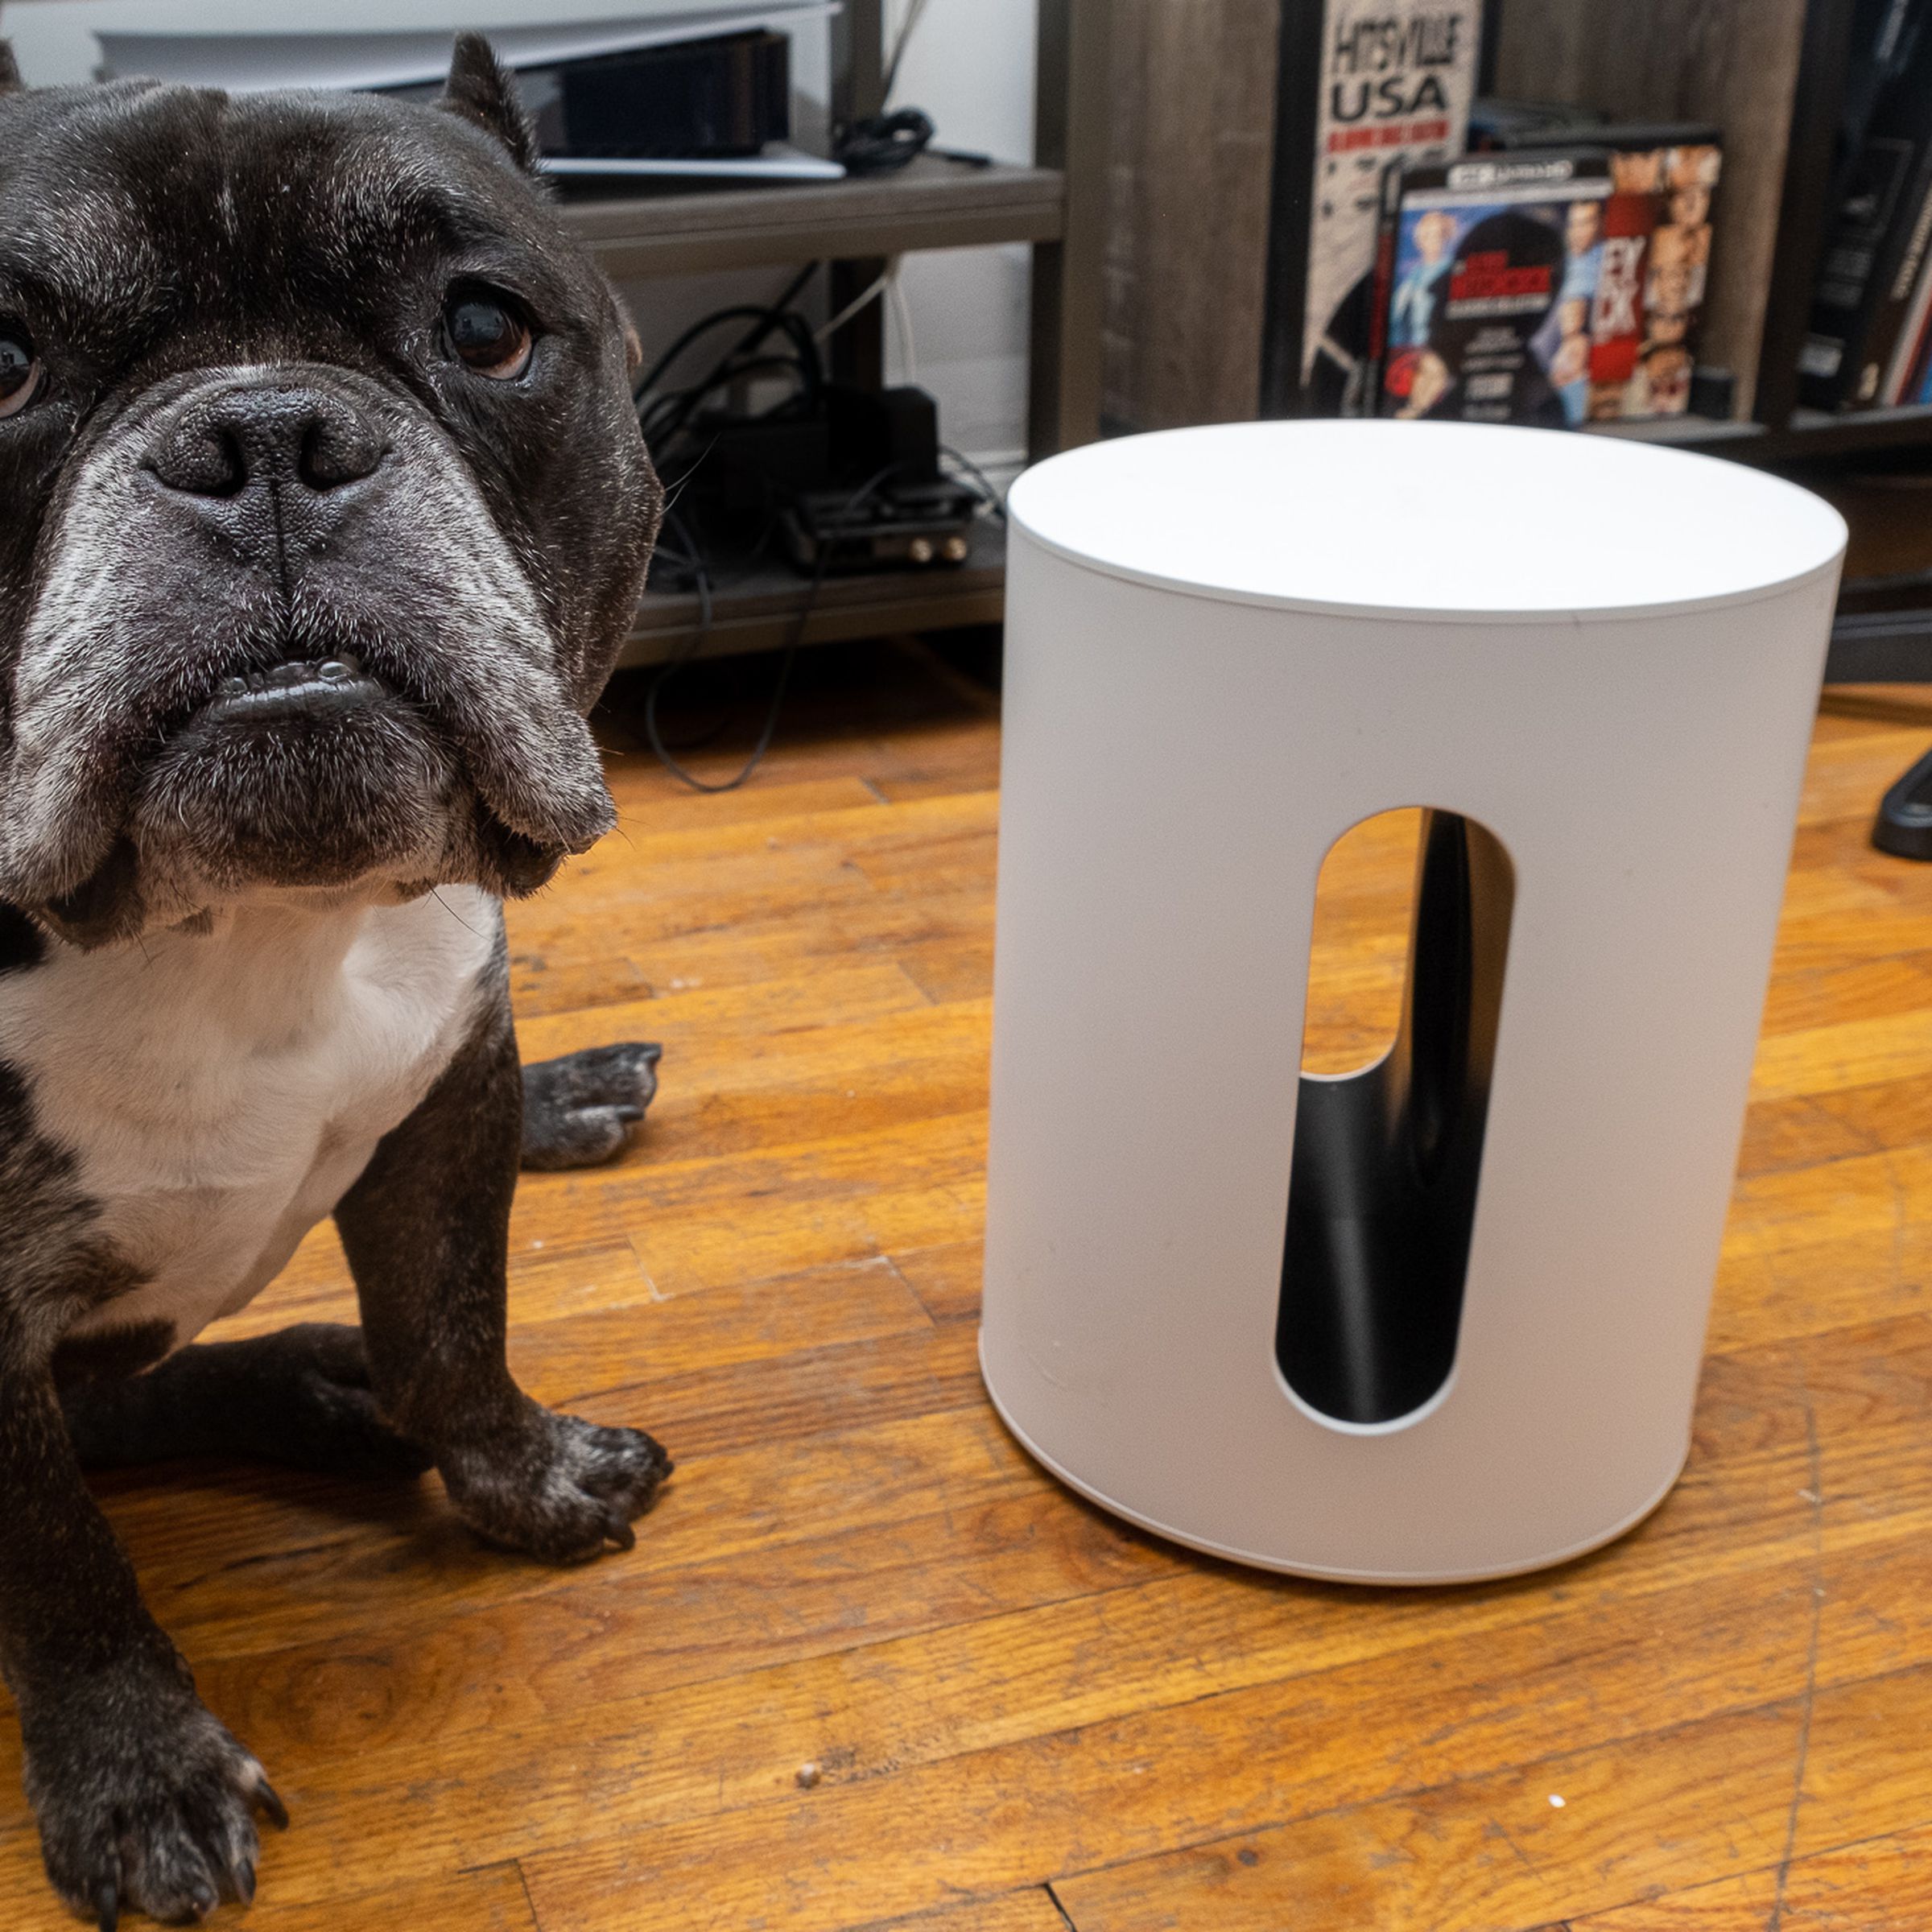 An image of a mixed breed dog next to the Sonos Sub Mini subwoofer.